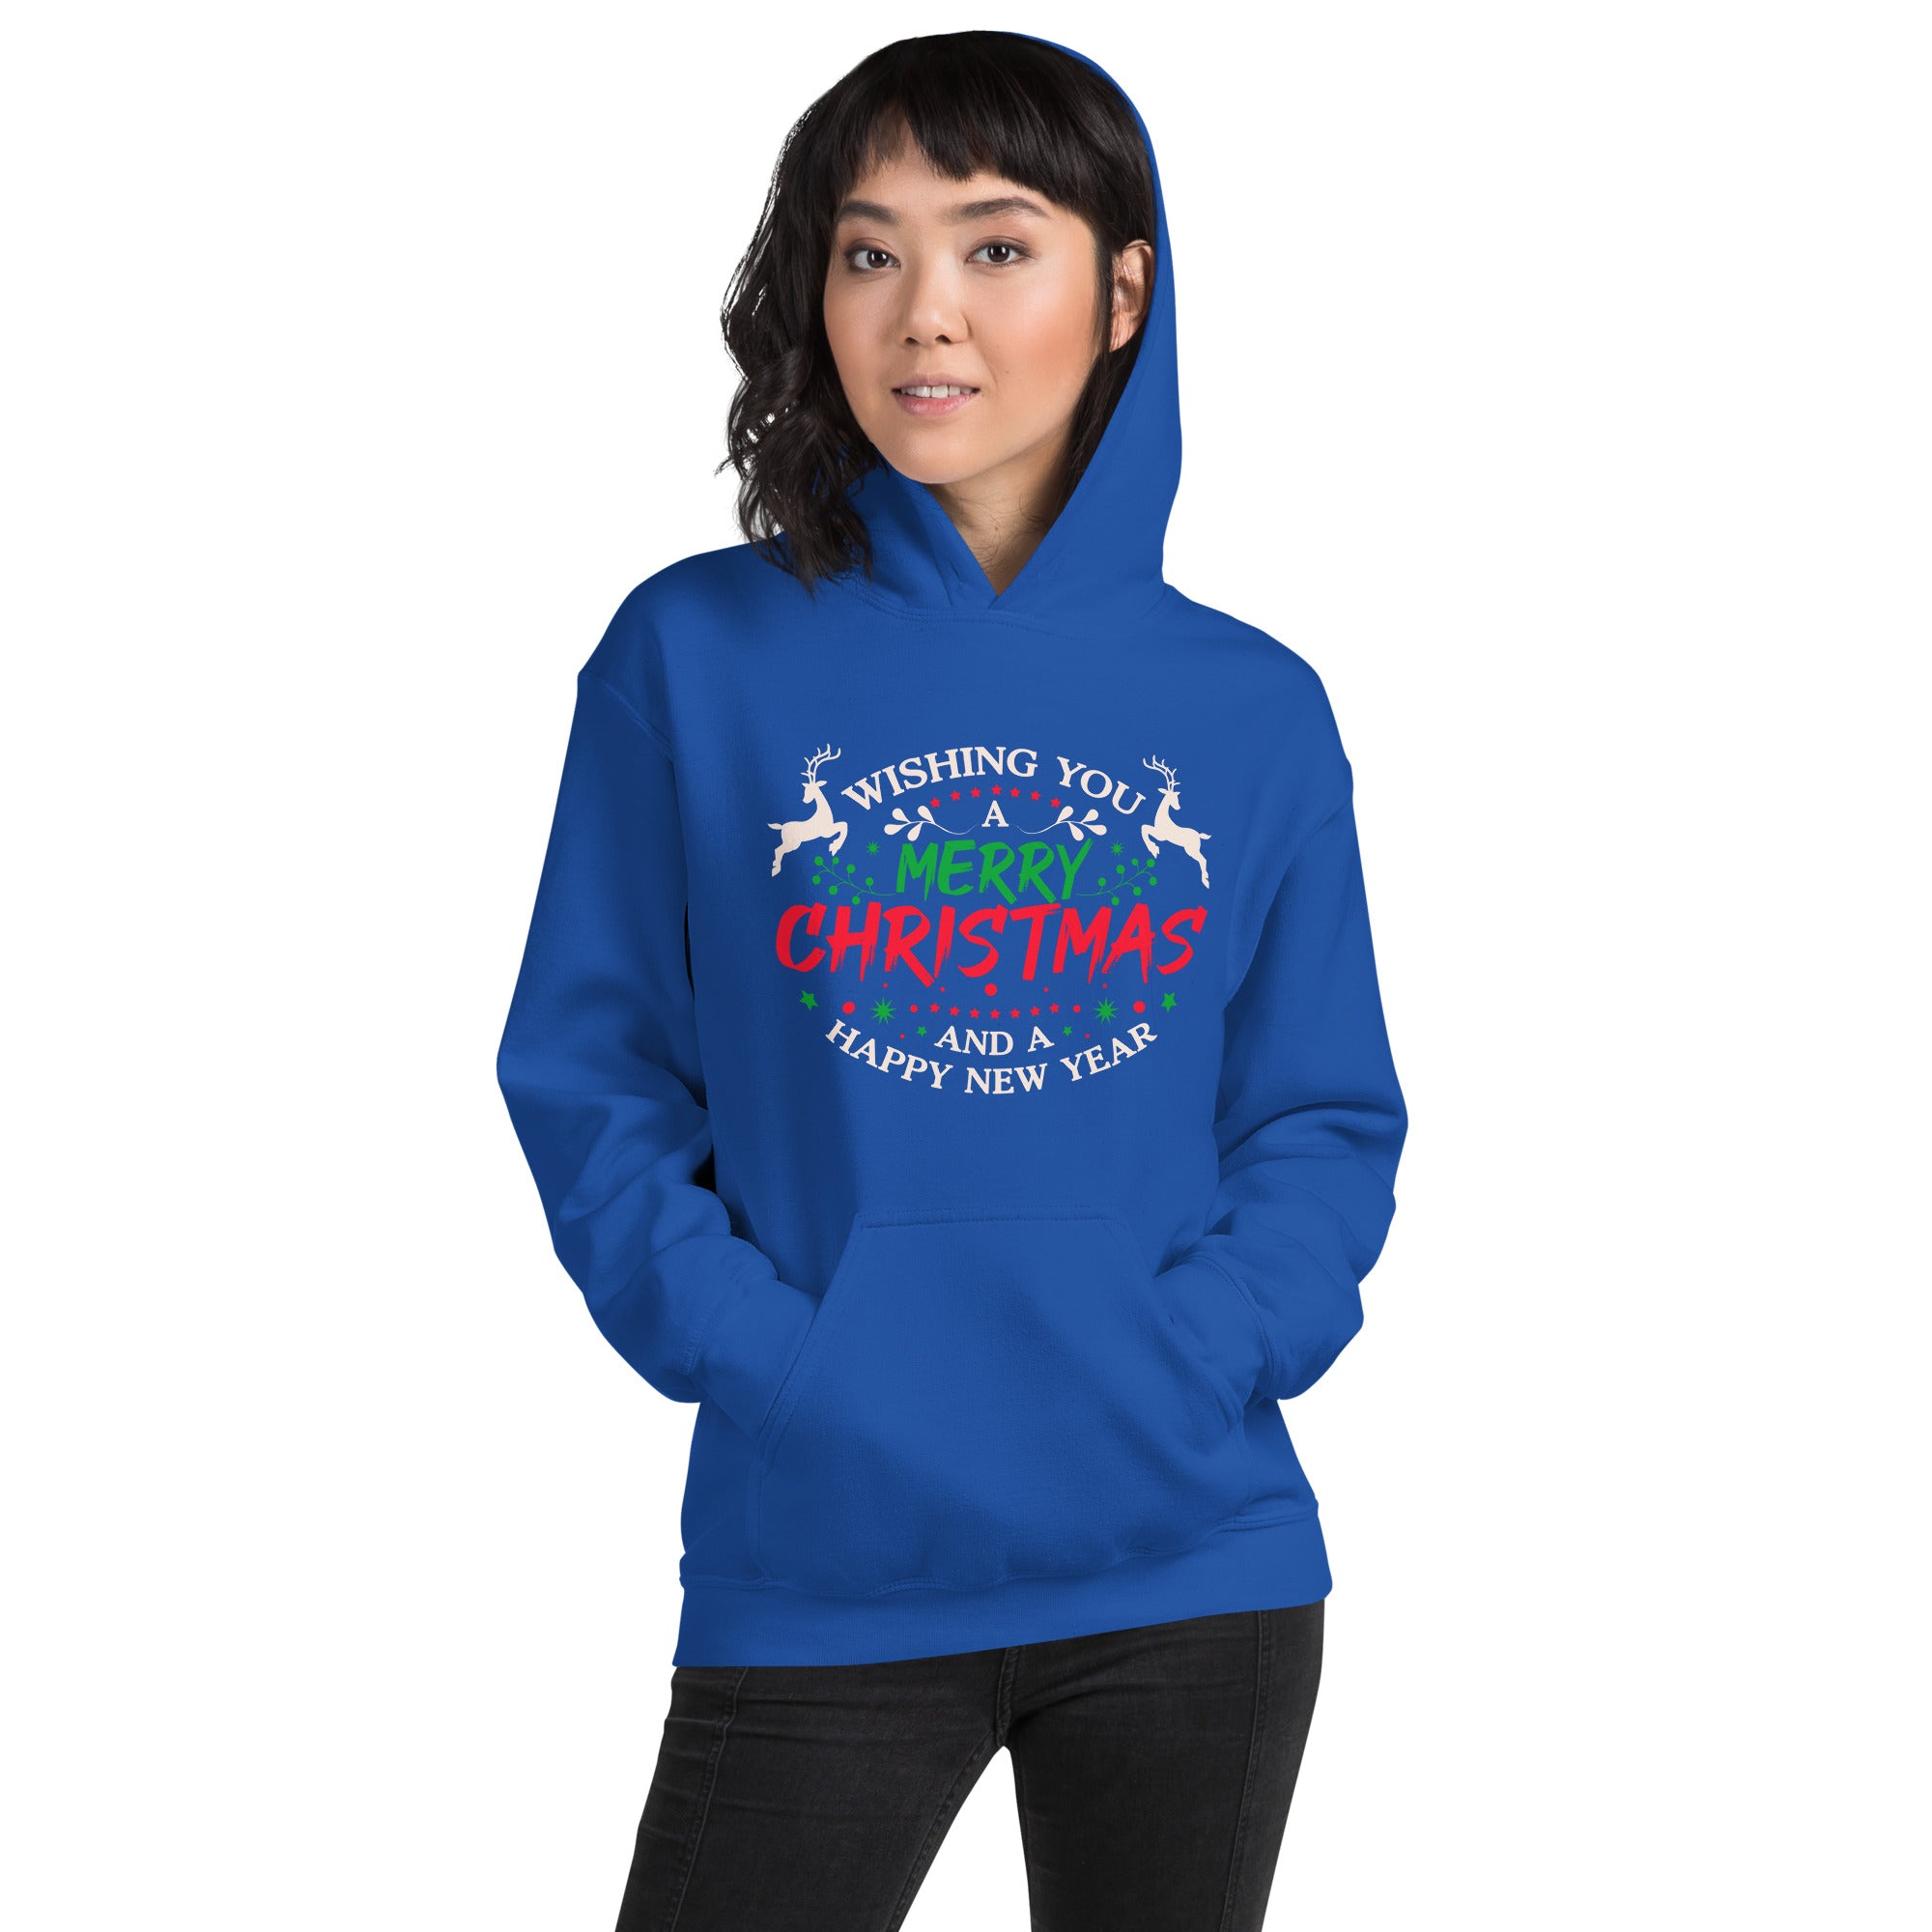 Wishing You A Merry Christmas And A Happy New Year Xmas Winter Holiday Women's Hoodie